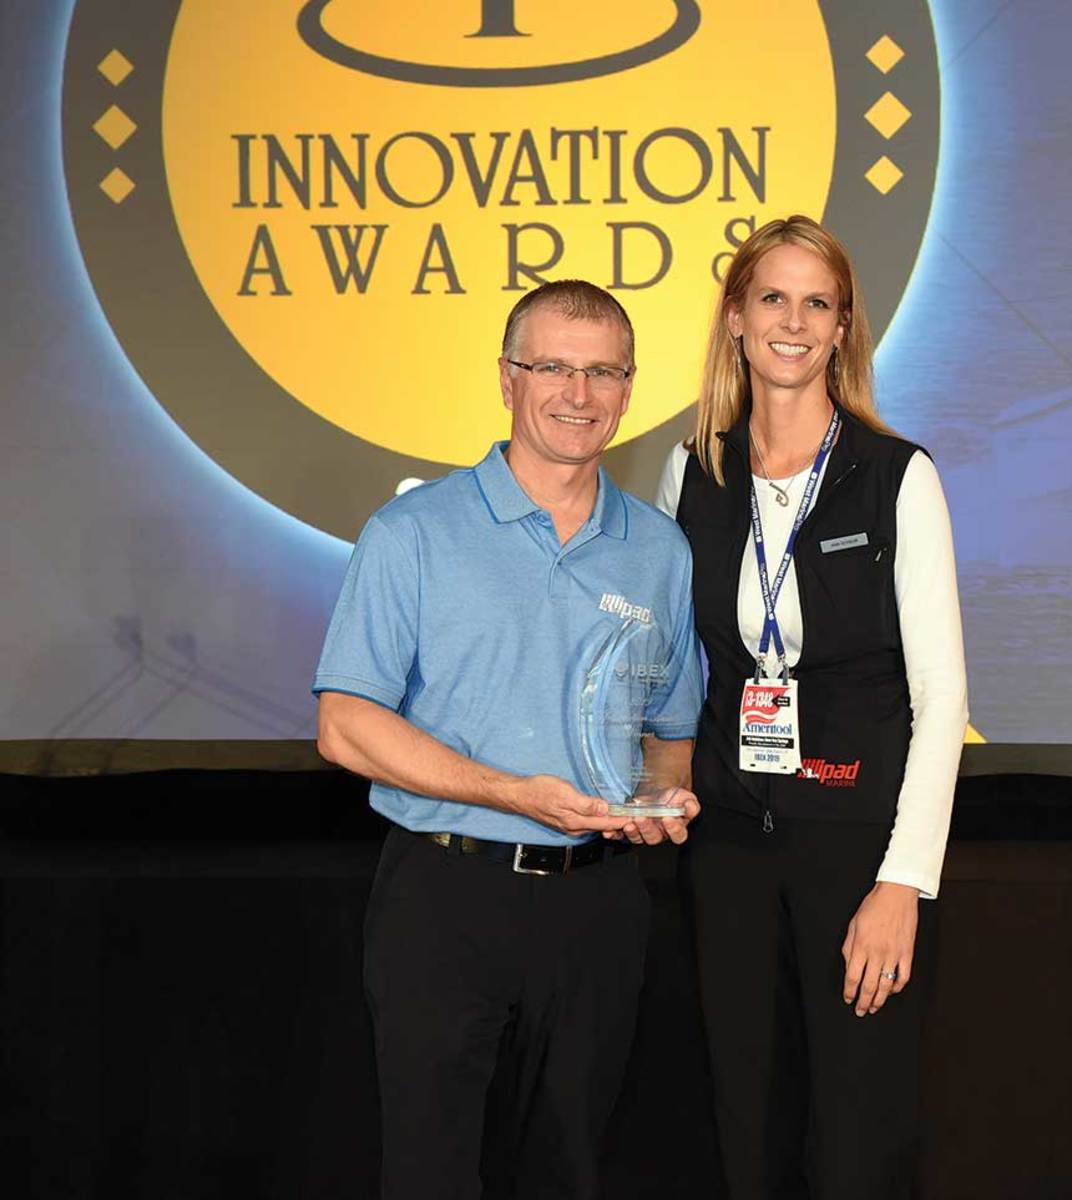 Cory and Ann Schaub build two products at Lillipad Marine, and they’ve won Innovation Awards for both.